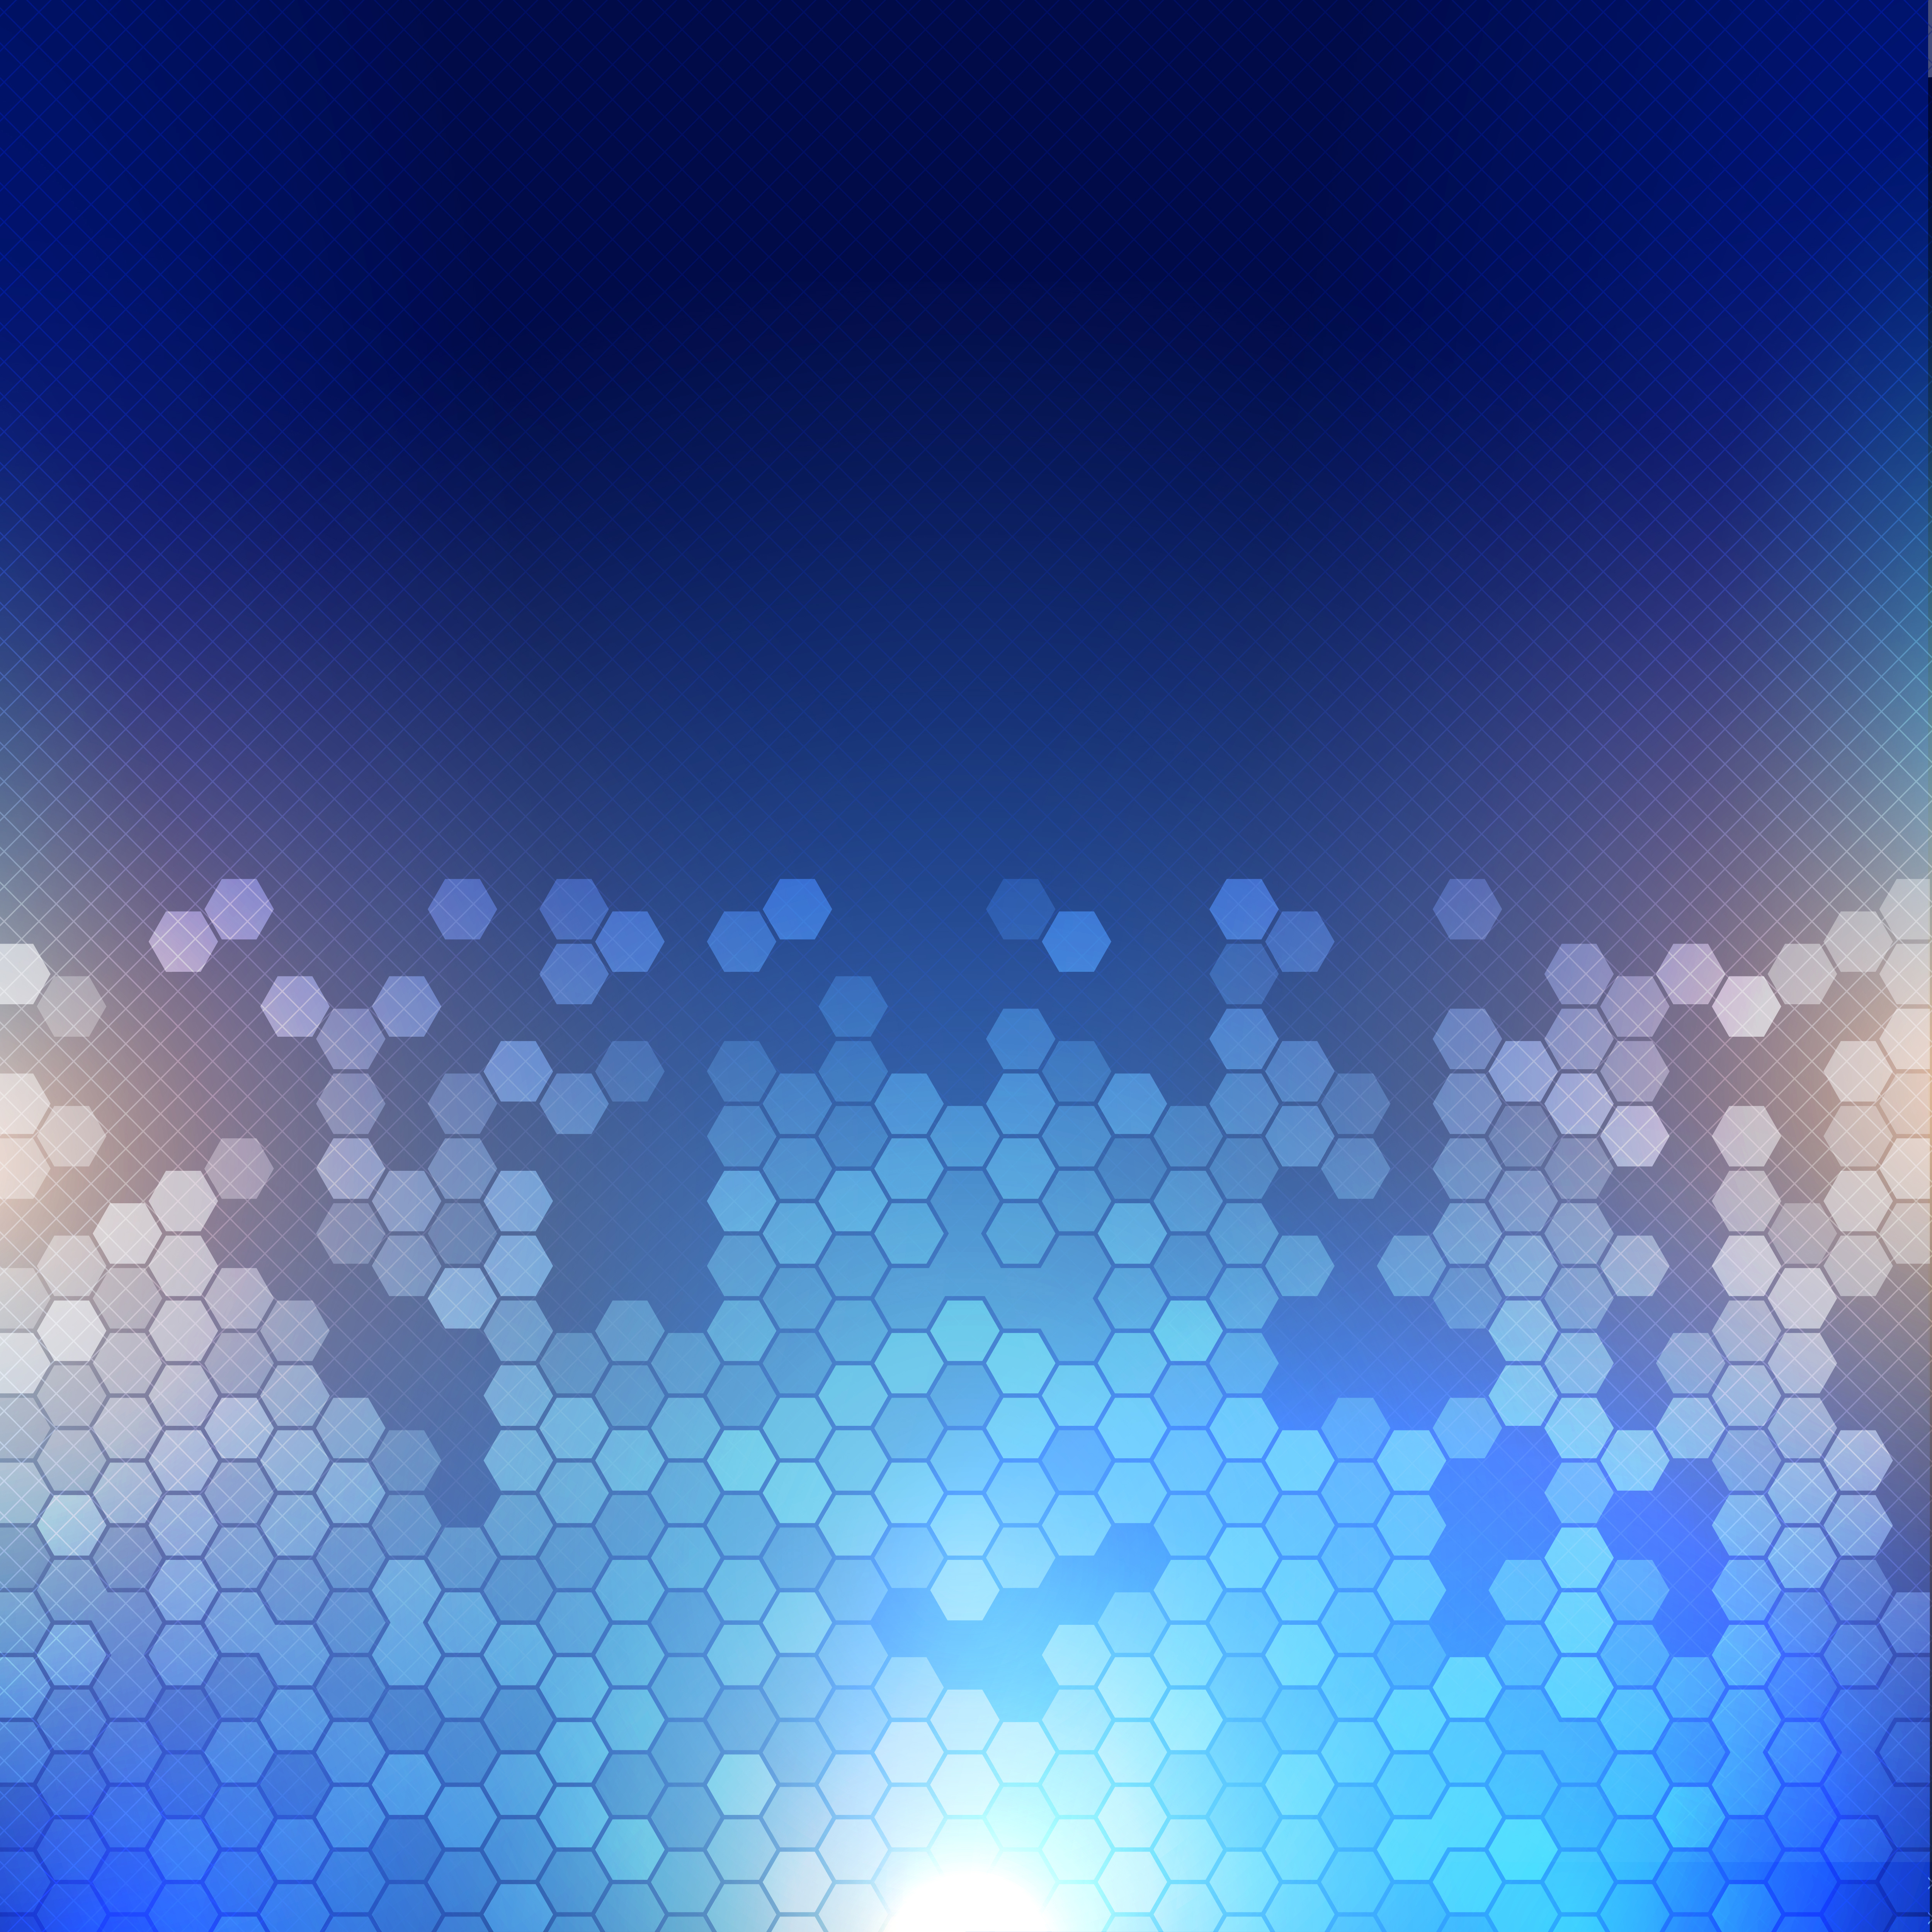  Techno  abstract background  with a hexagon design 230006 